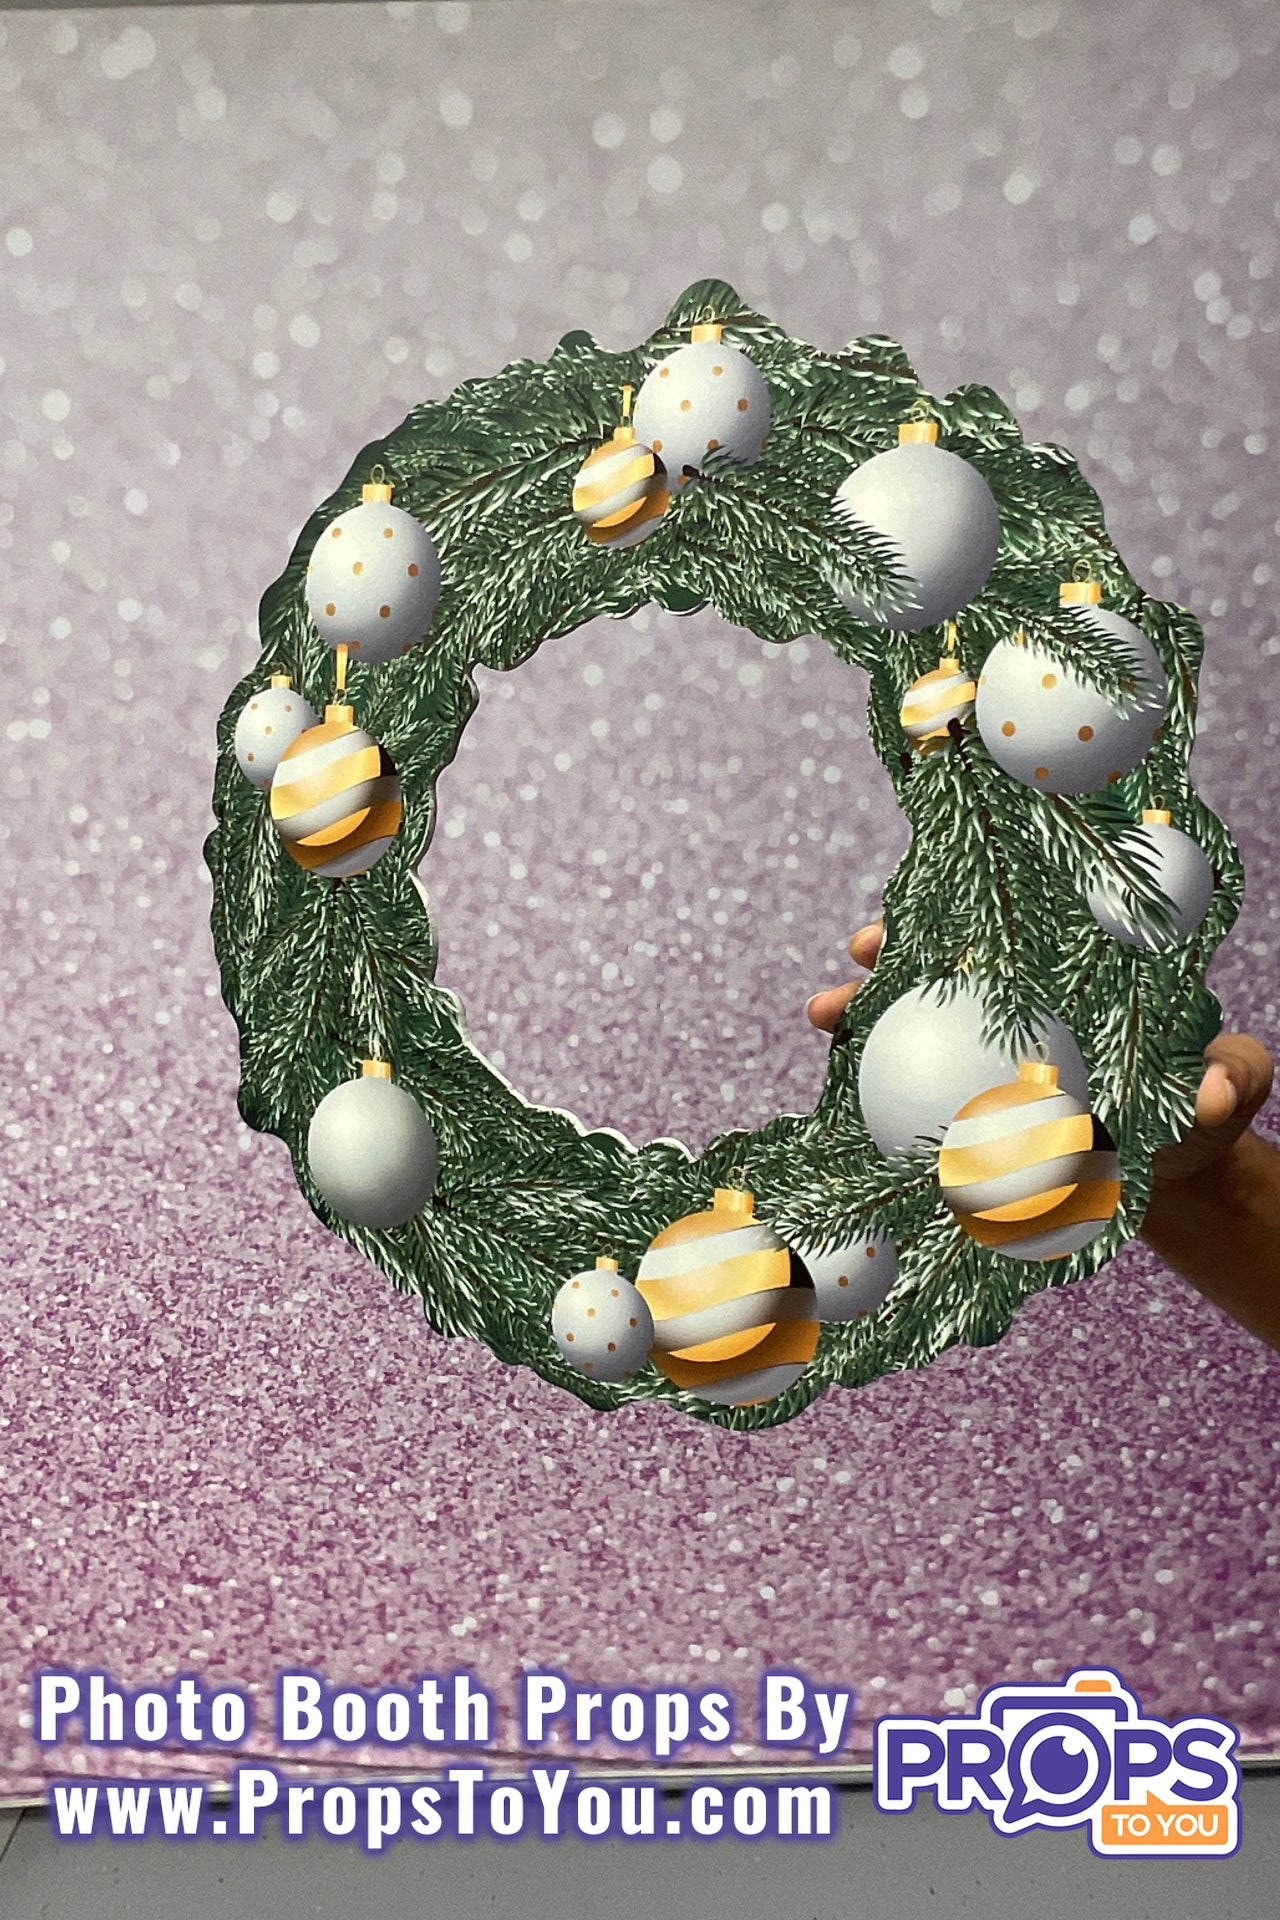 BIG Props: Christmas - Classy! Evergreen/Ornament Wreath Silver and Gold Photo Booth Prop